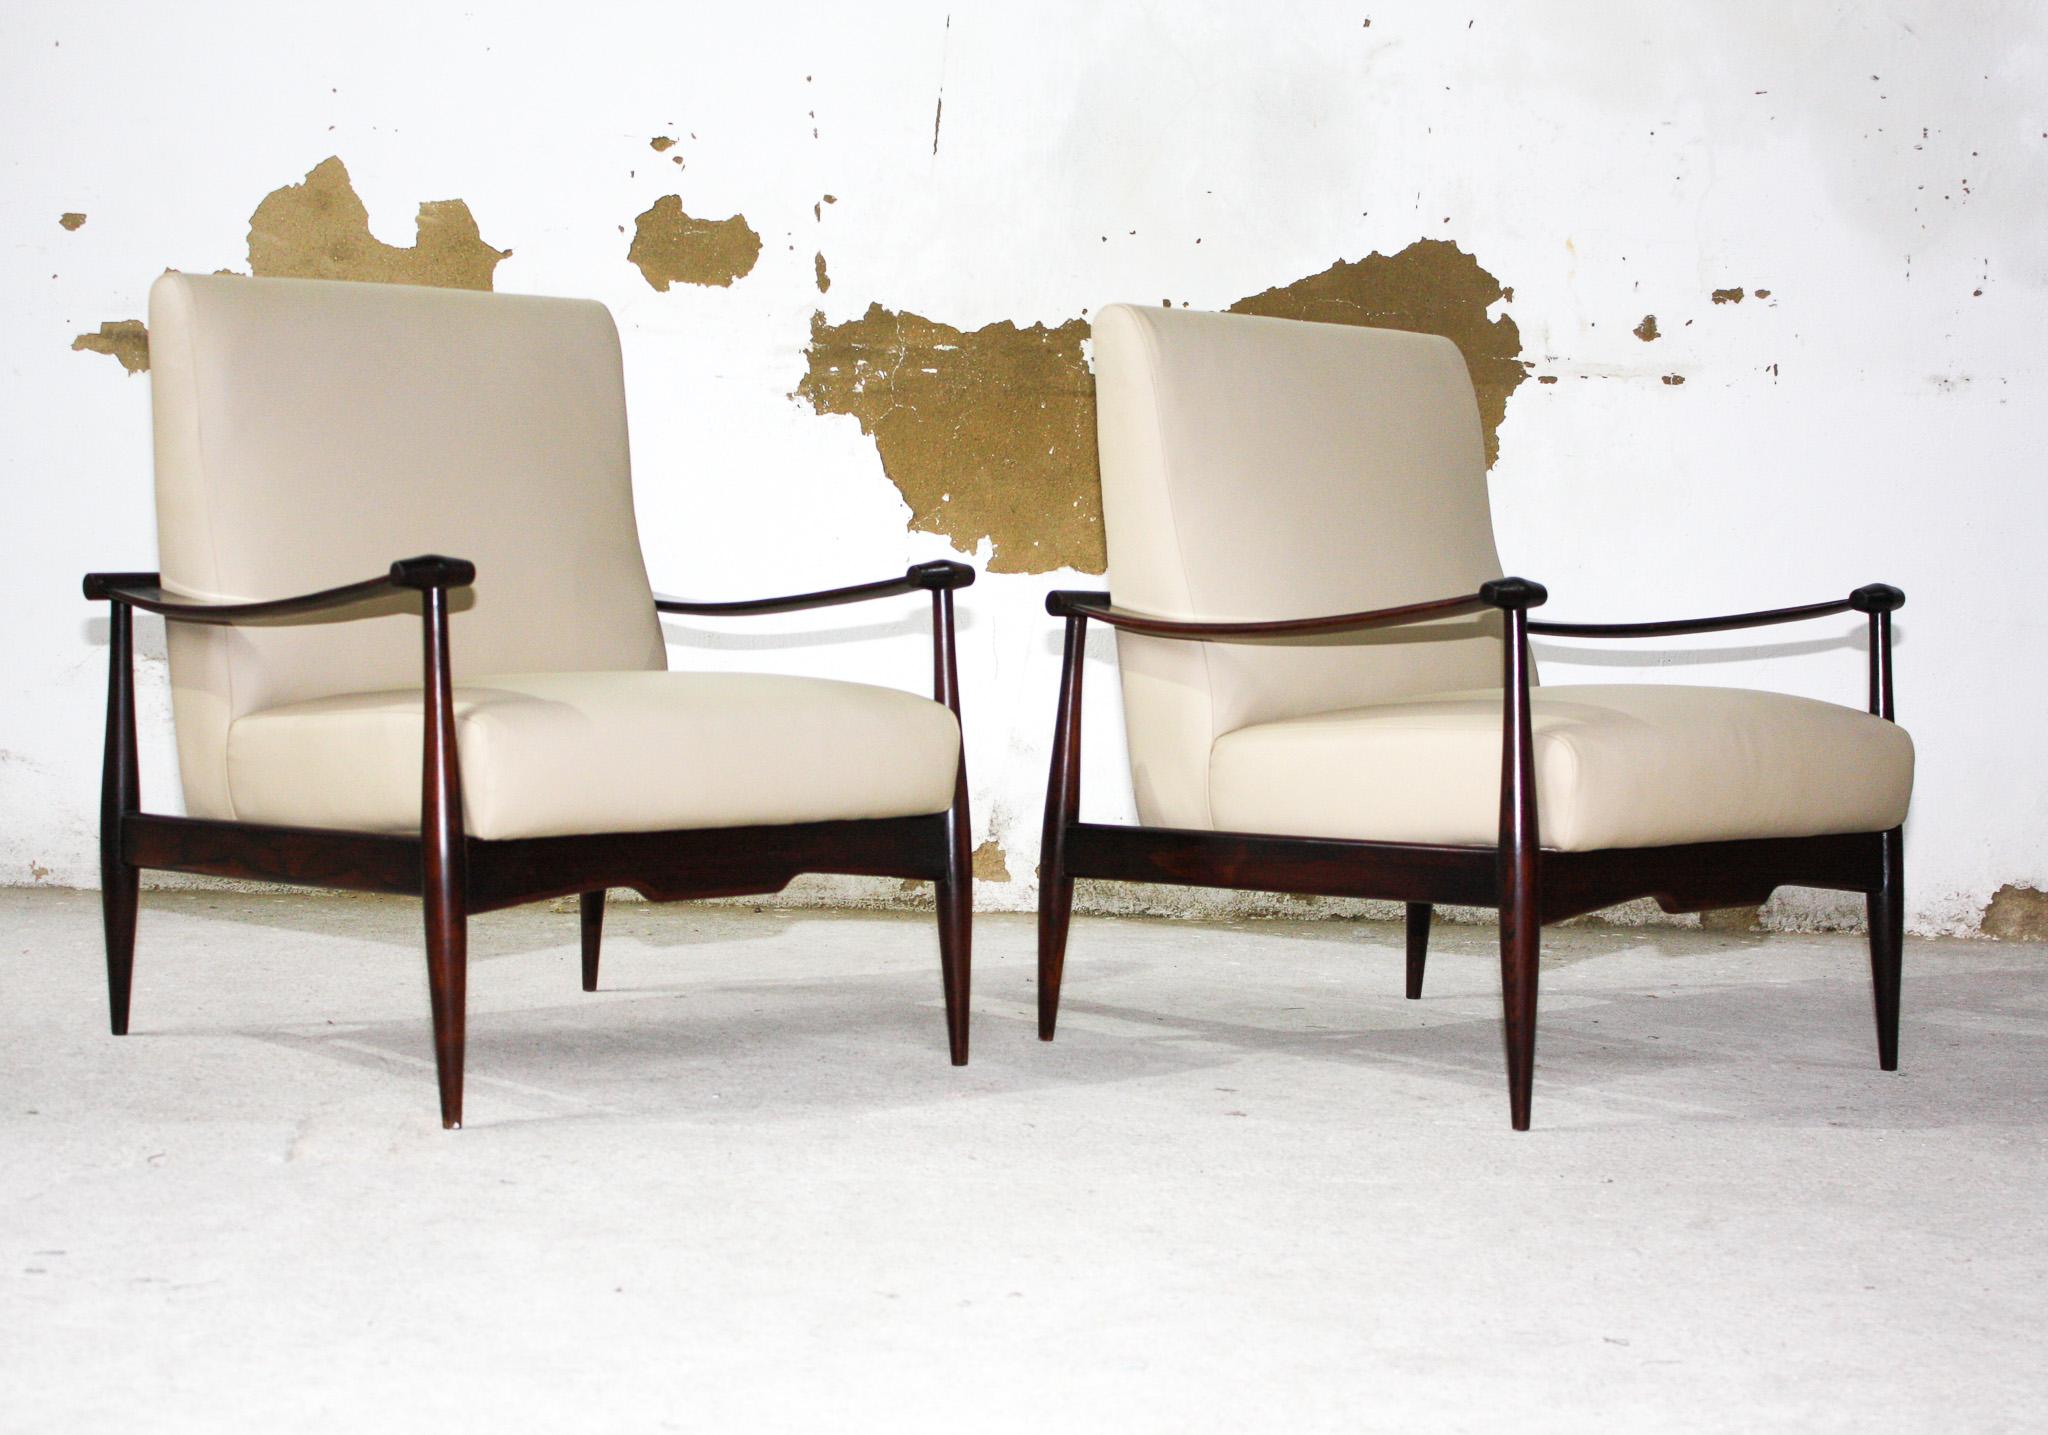 Brazilian Modern Armchair Set in Hardwood & Beige Leather by Liceu de Artes 1960 In Good Condition For Sale In New York, NY